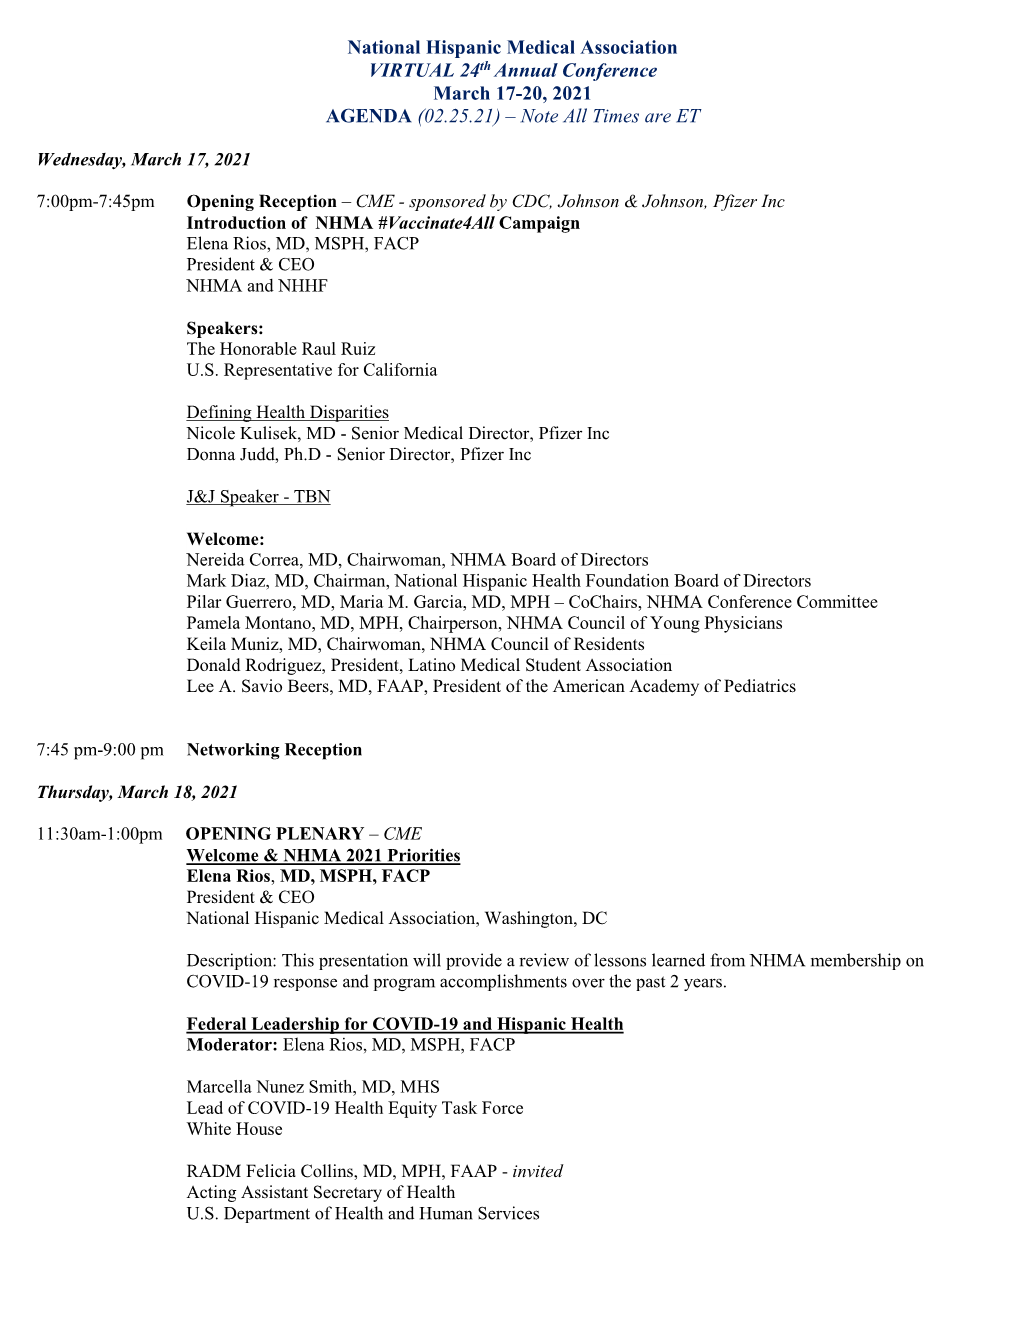 National Hispanic Medical Association VIRTUAL 24Th Annual Conference March 17-20, 2021 AGENDA (02.25.21) – Note All Times Are ET